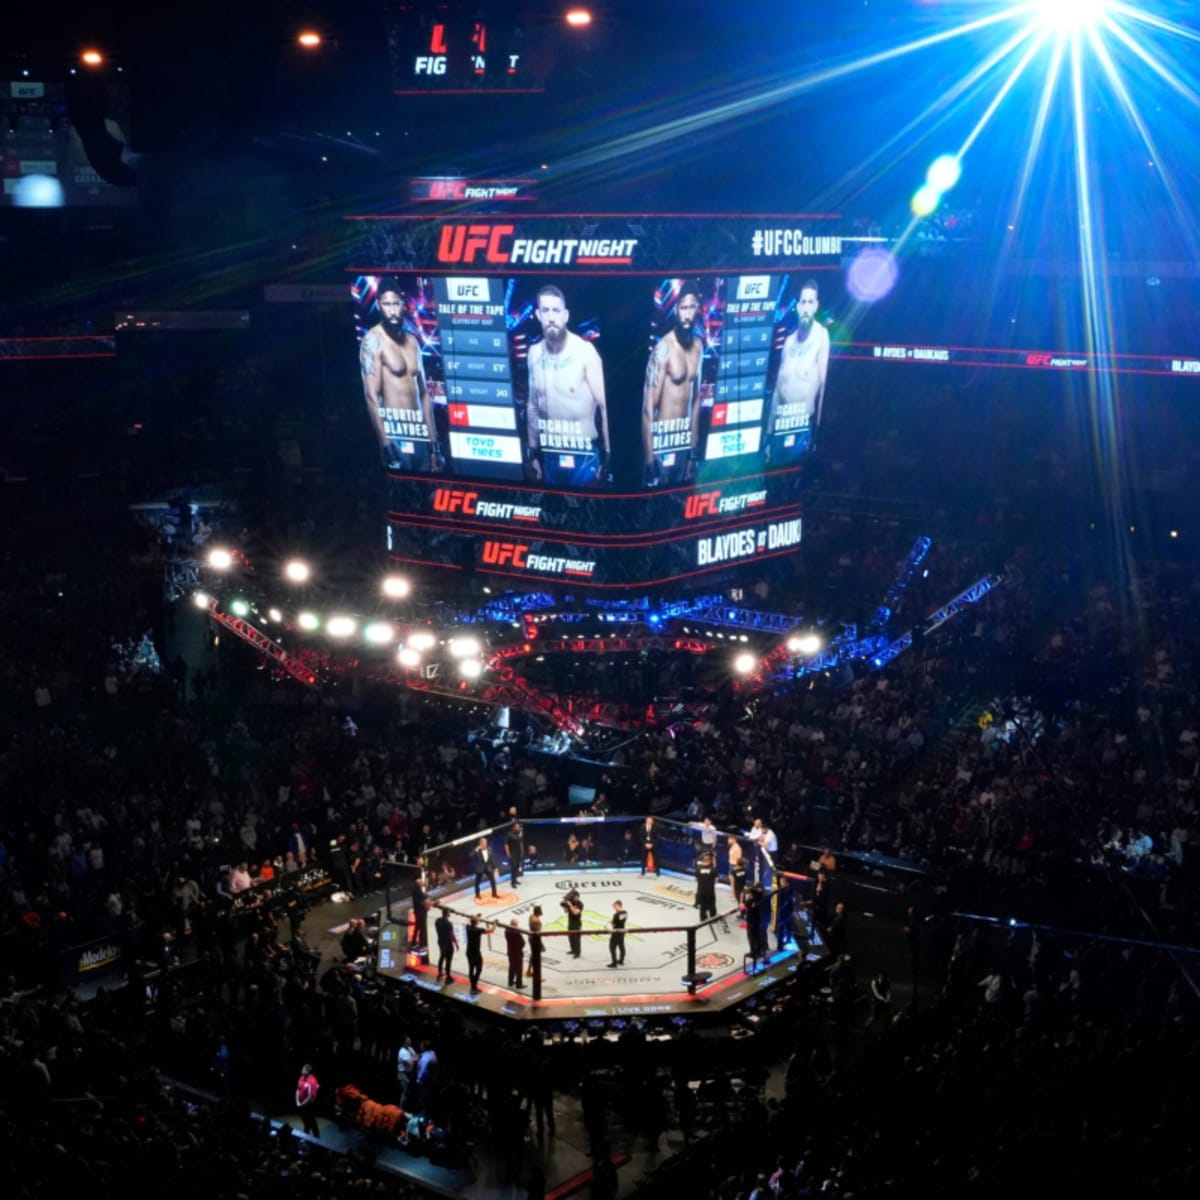 Toronto main event fighters Strickland, du Plessis fight in crowd at UFC  296 in Vegas 